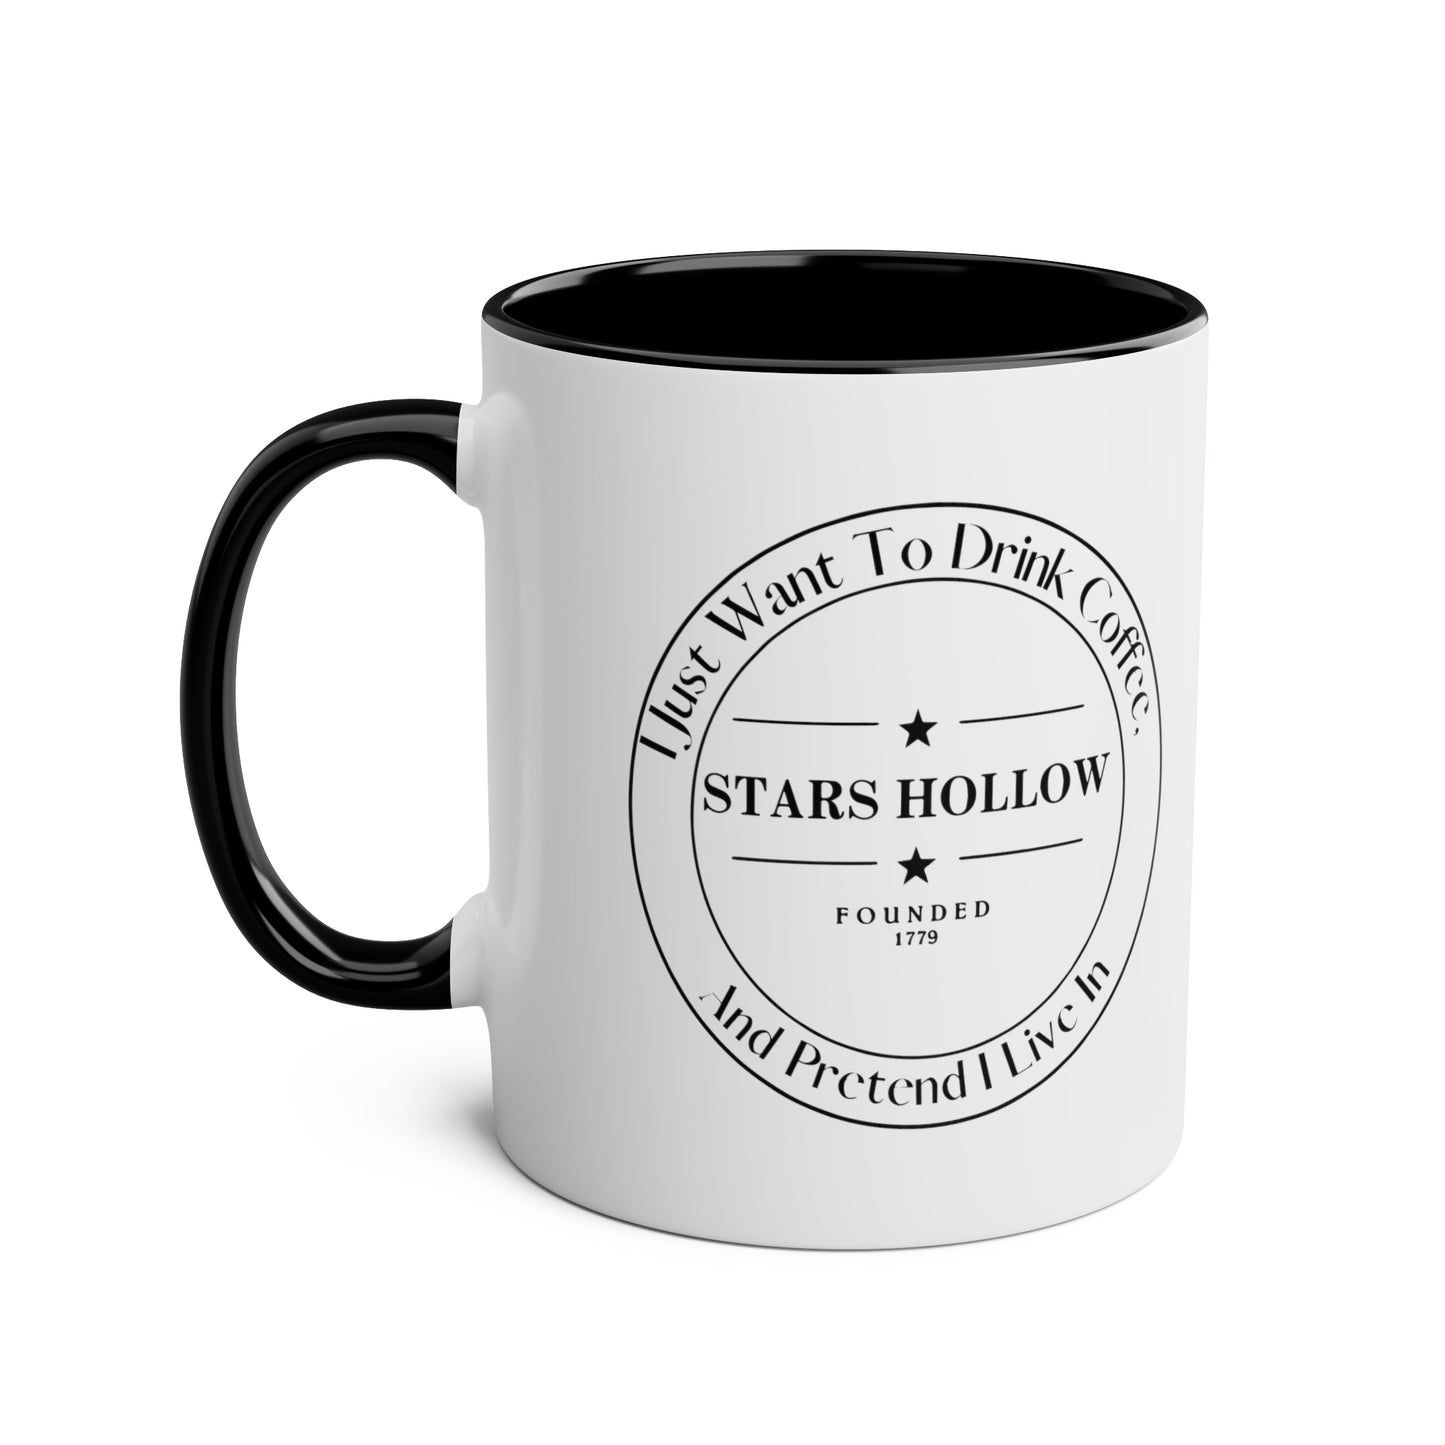 I Want To Live In Stars Hollow / Gilmore Girls Mug